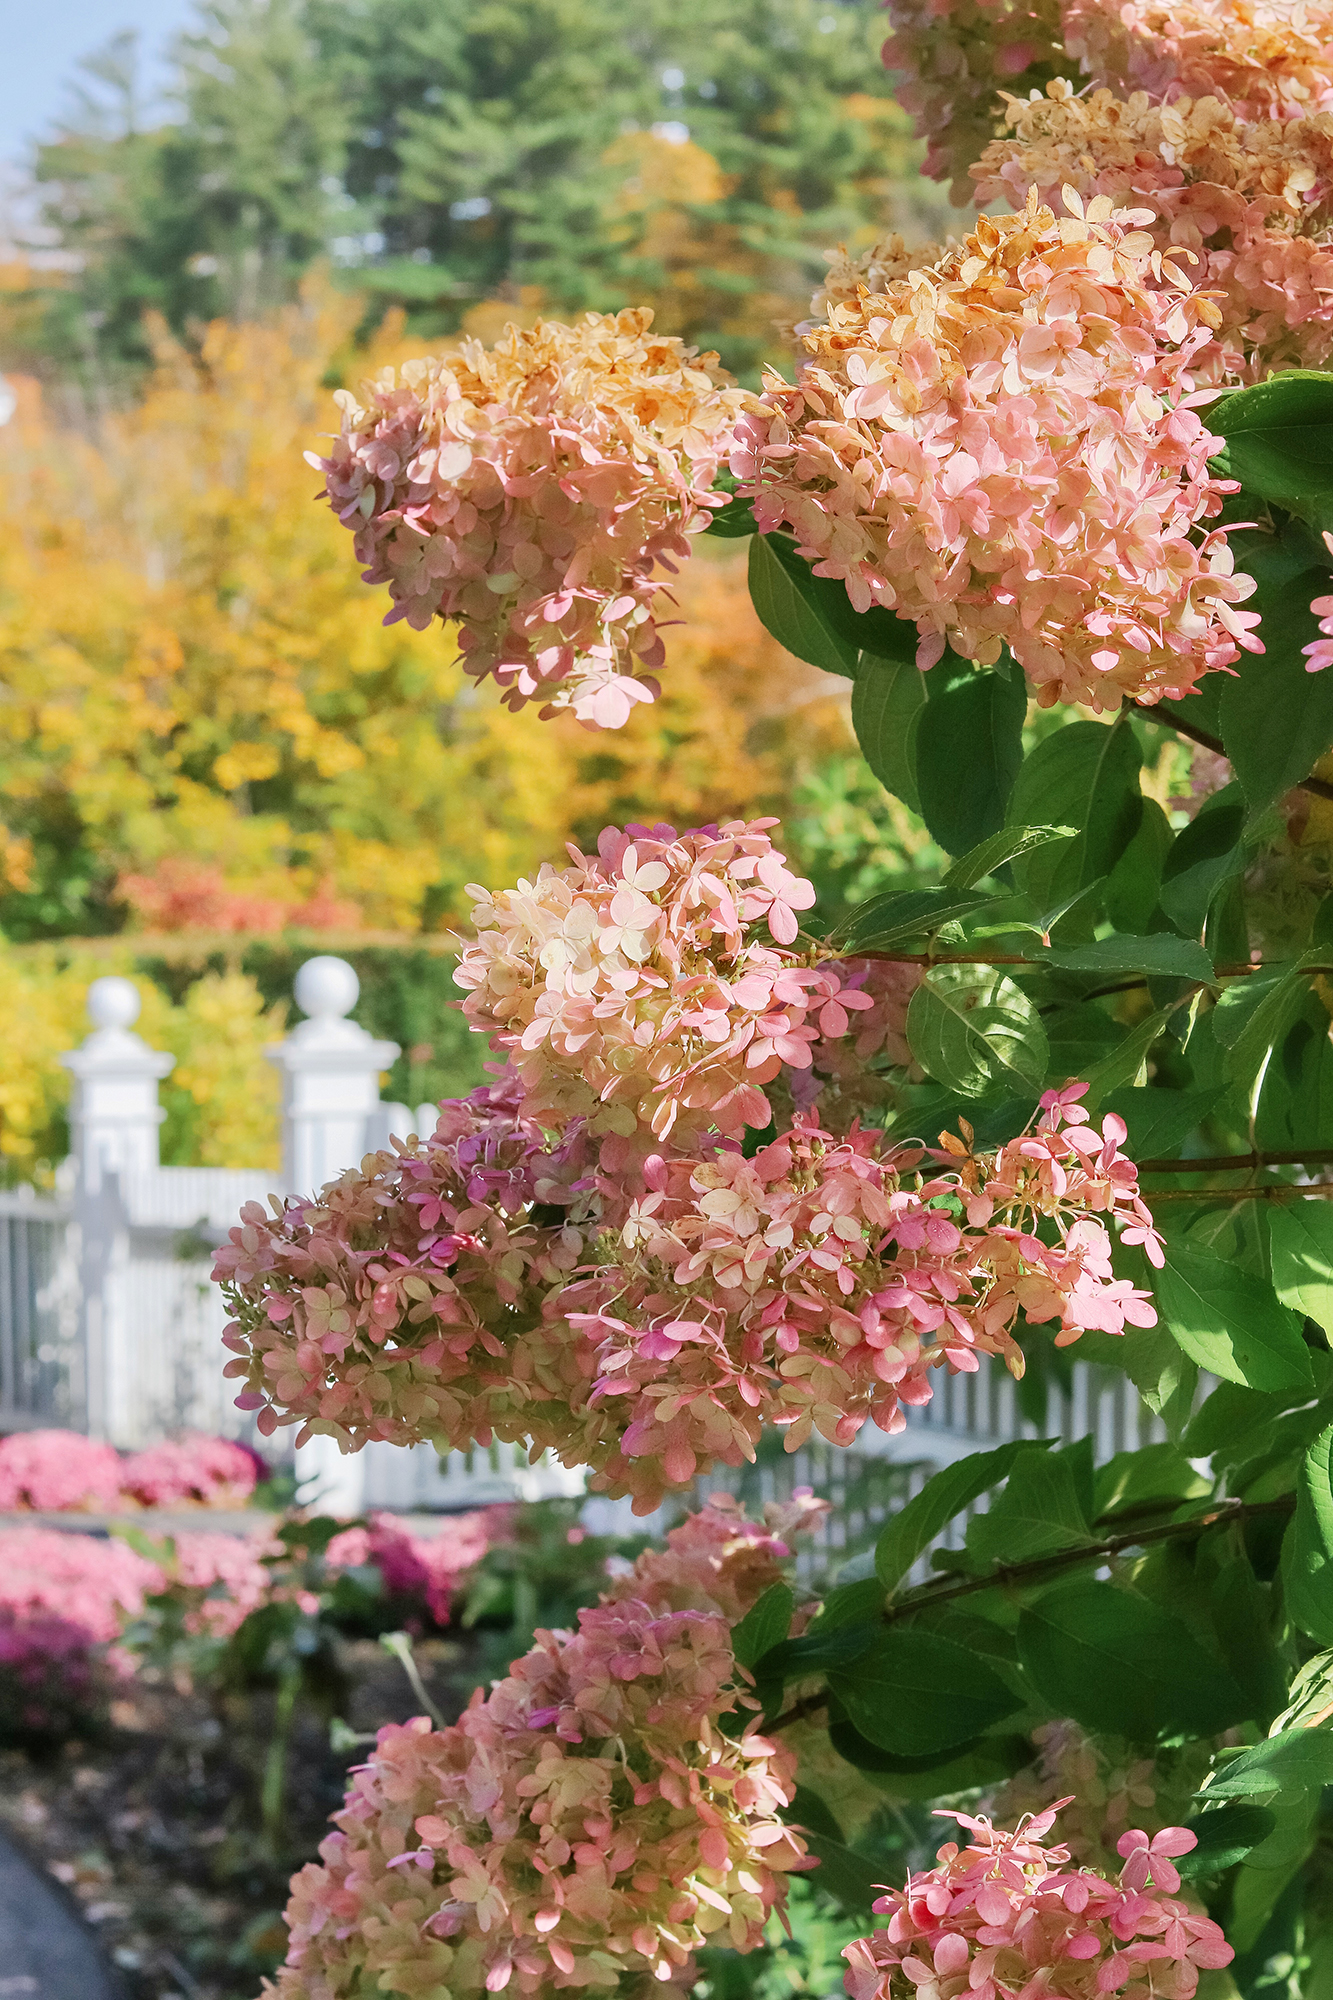 Gorgeous cone hydrangea outside of the Woodstock Inn entrance. - While Leaf Peeping in Vermont 2019. | Kristy Wicks